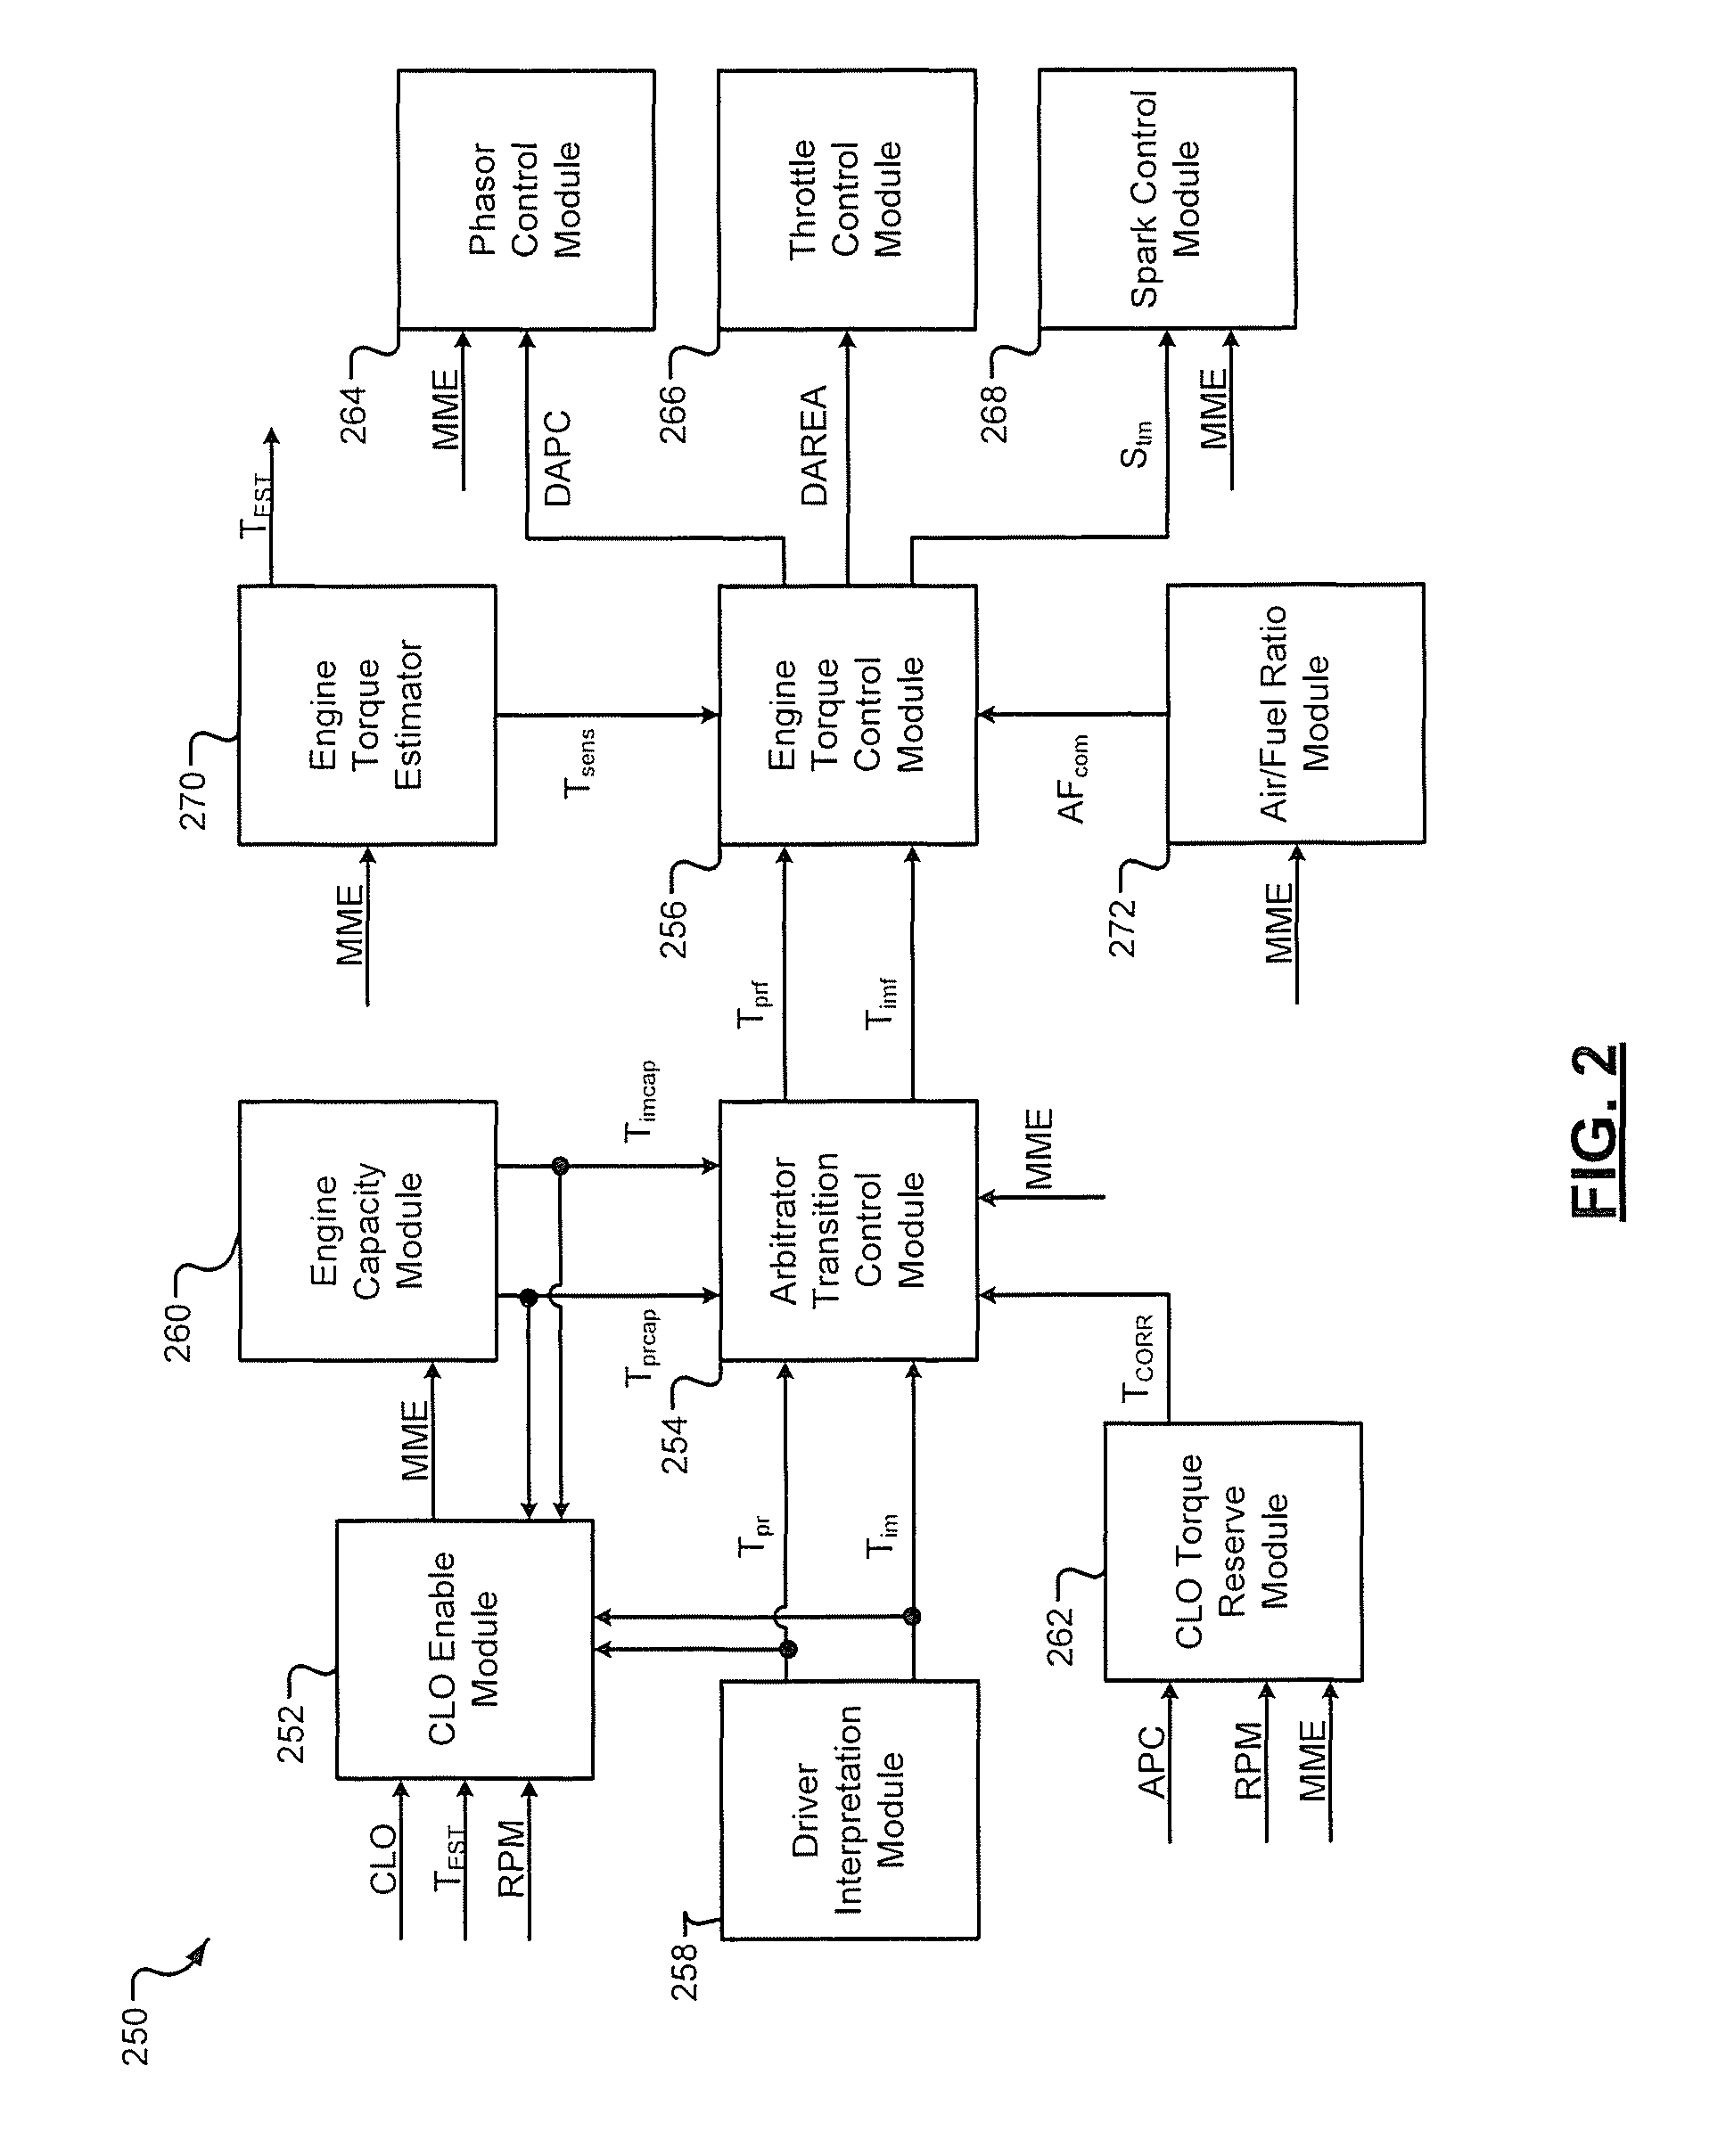 Torque reserve and emission control system for coordinated torque control